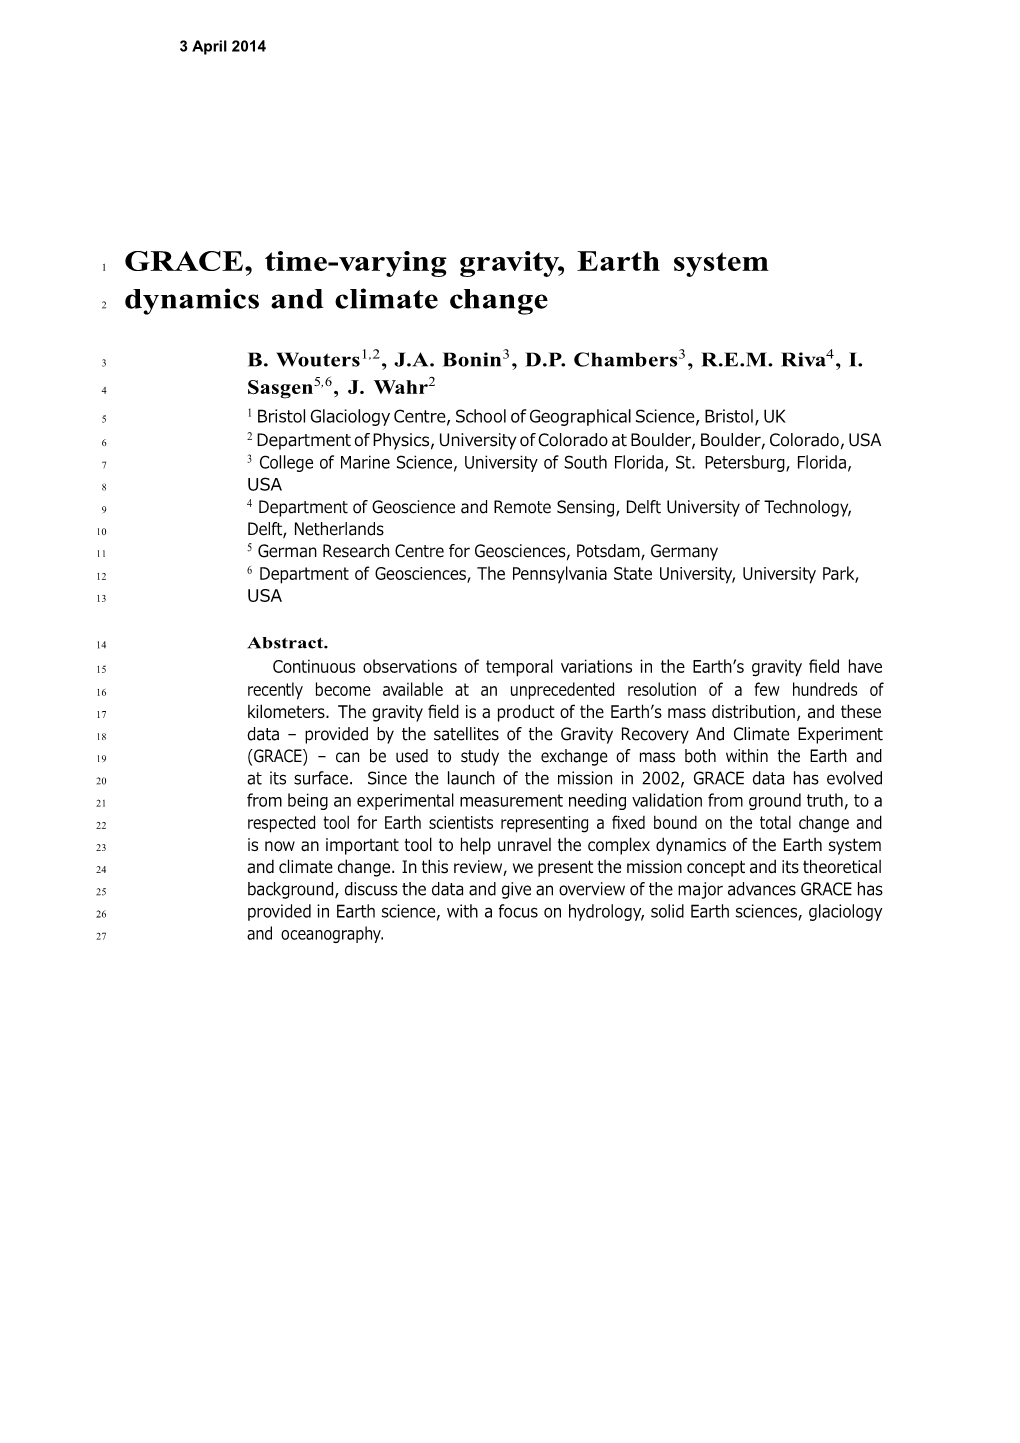 GRACE, Time-Varying Gravity, Earth System Dynamics and Climate Change 2